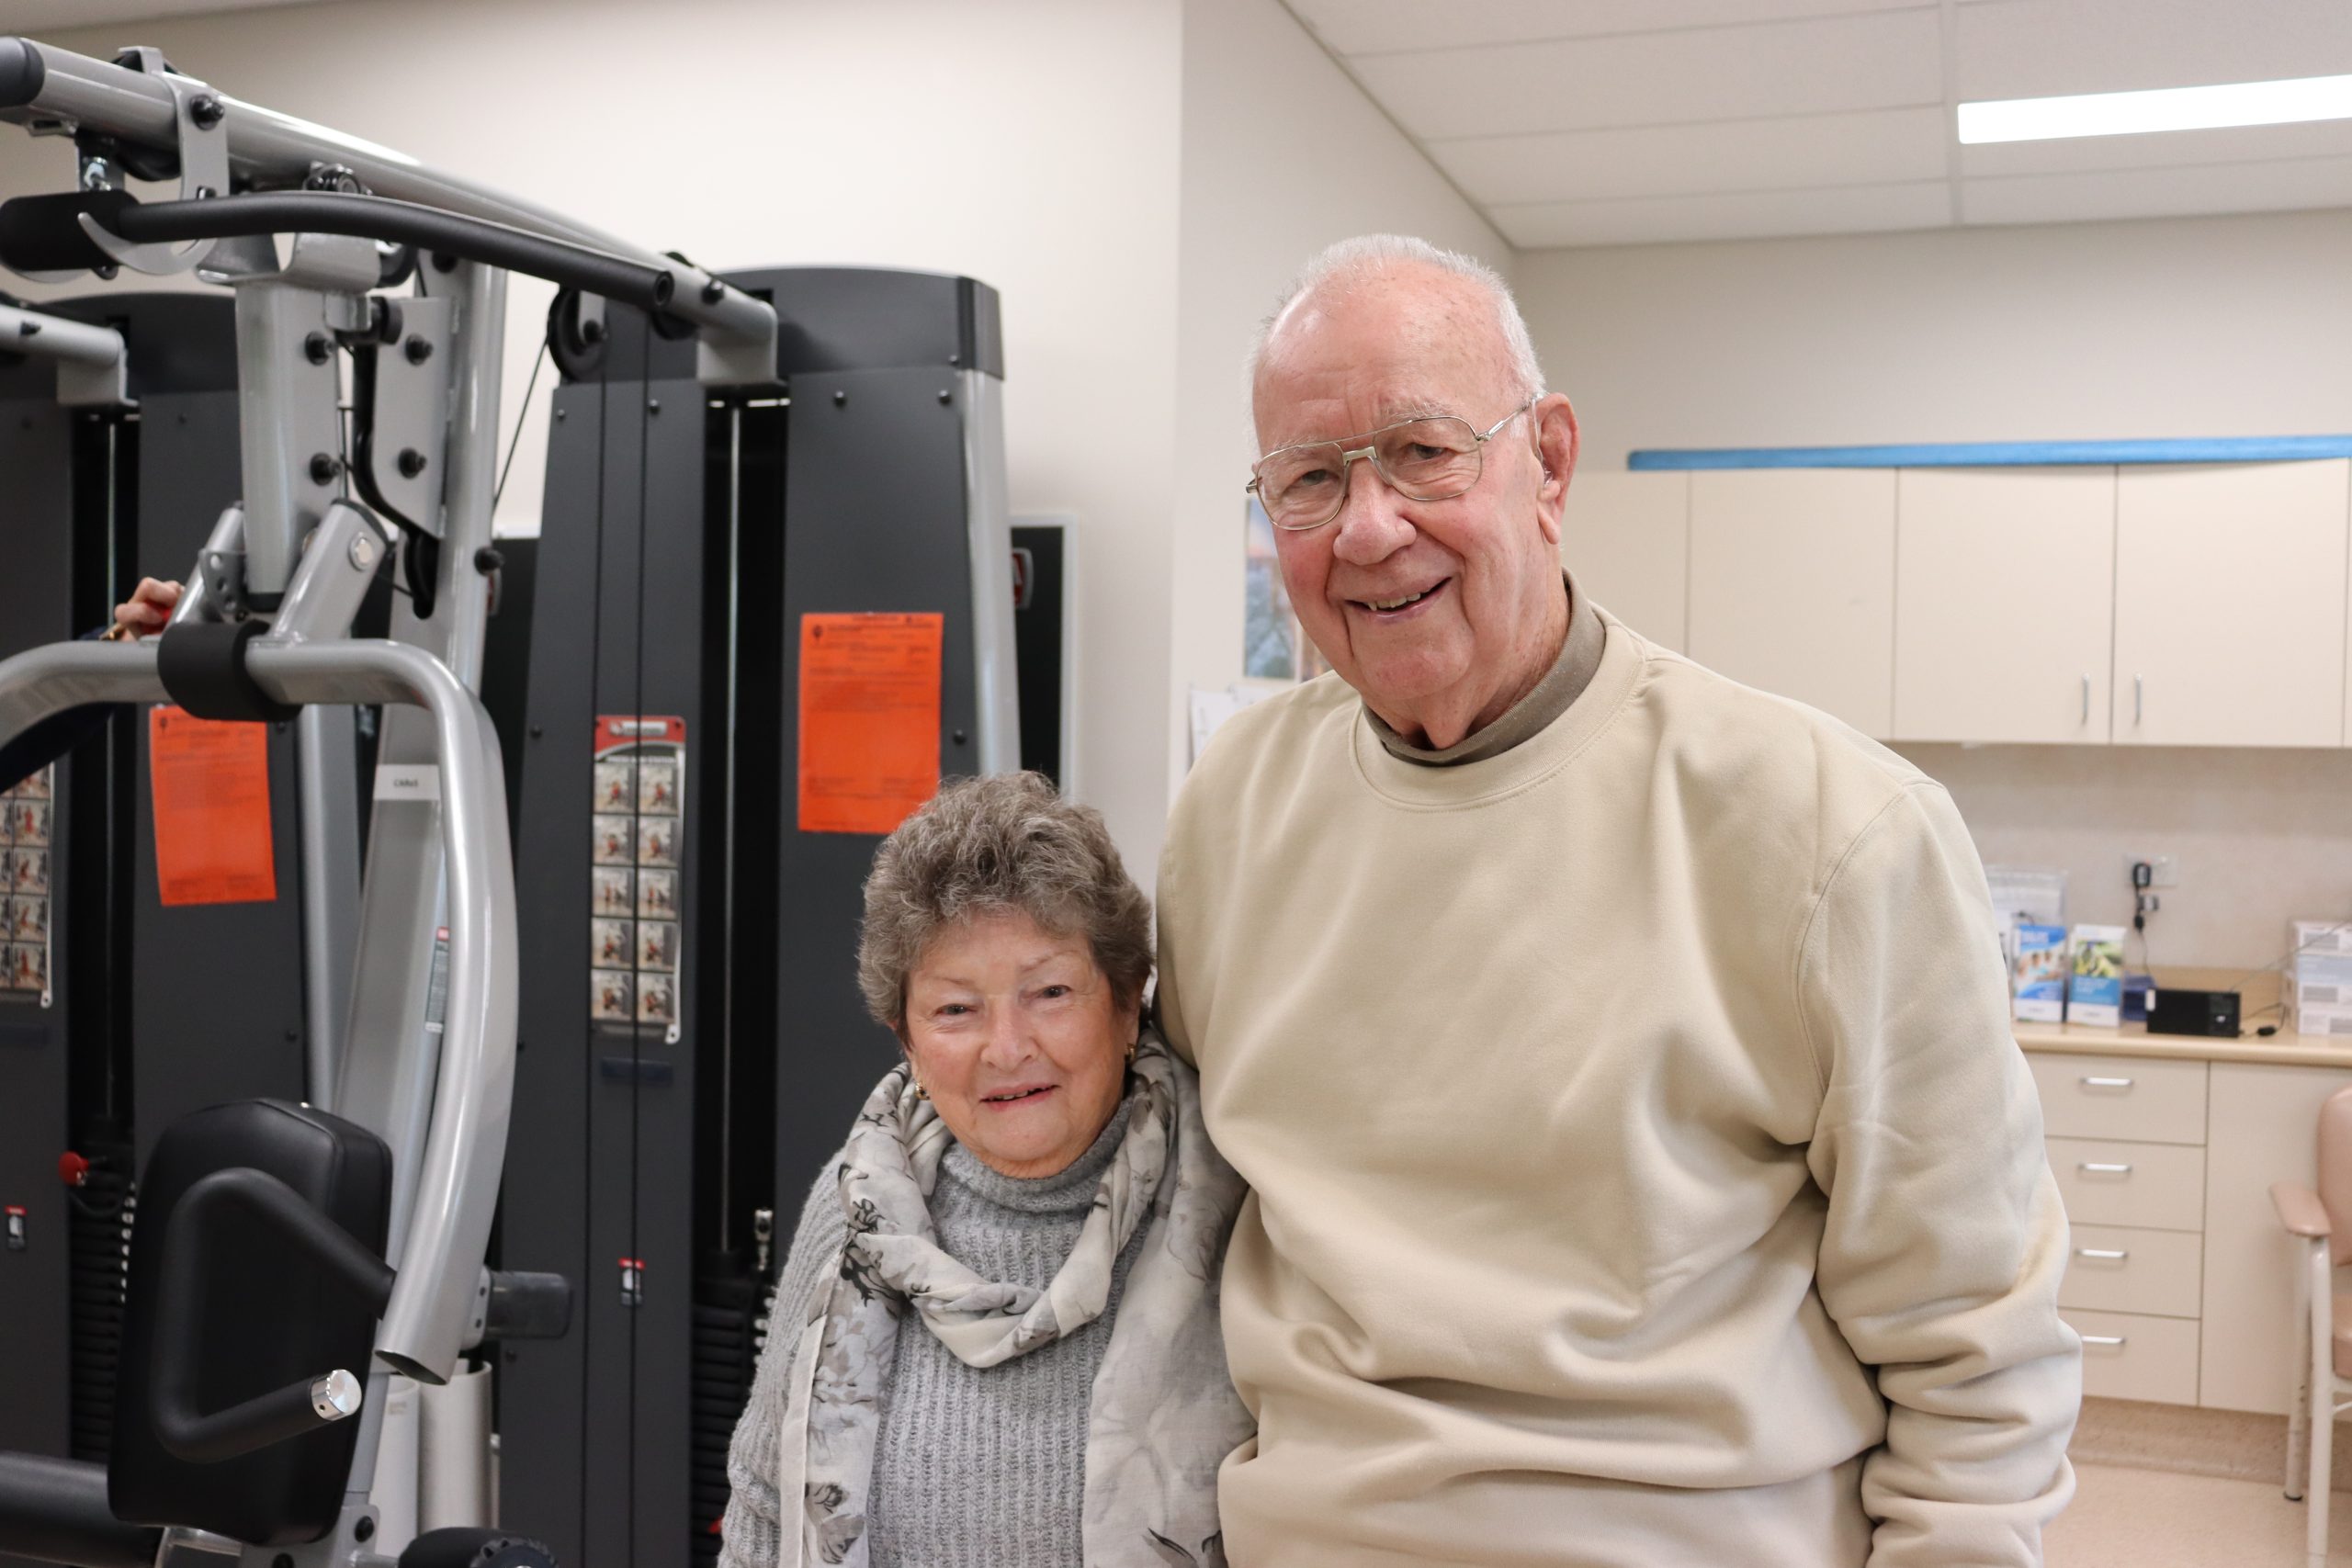 Husband and wife in their 80s smiling in a gym room